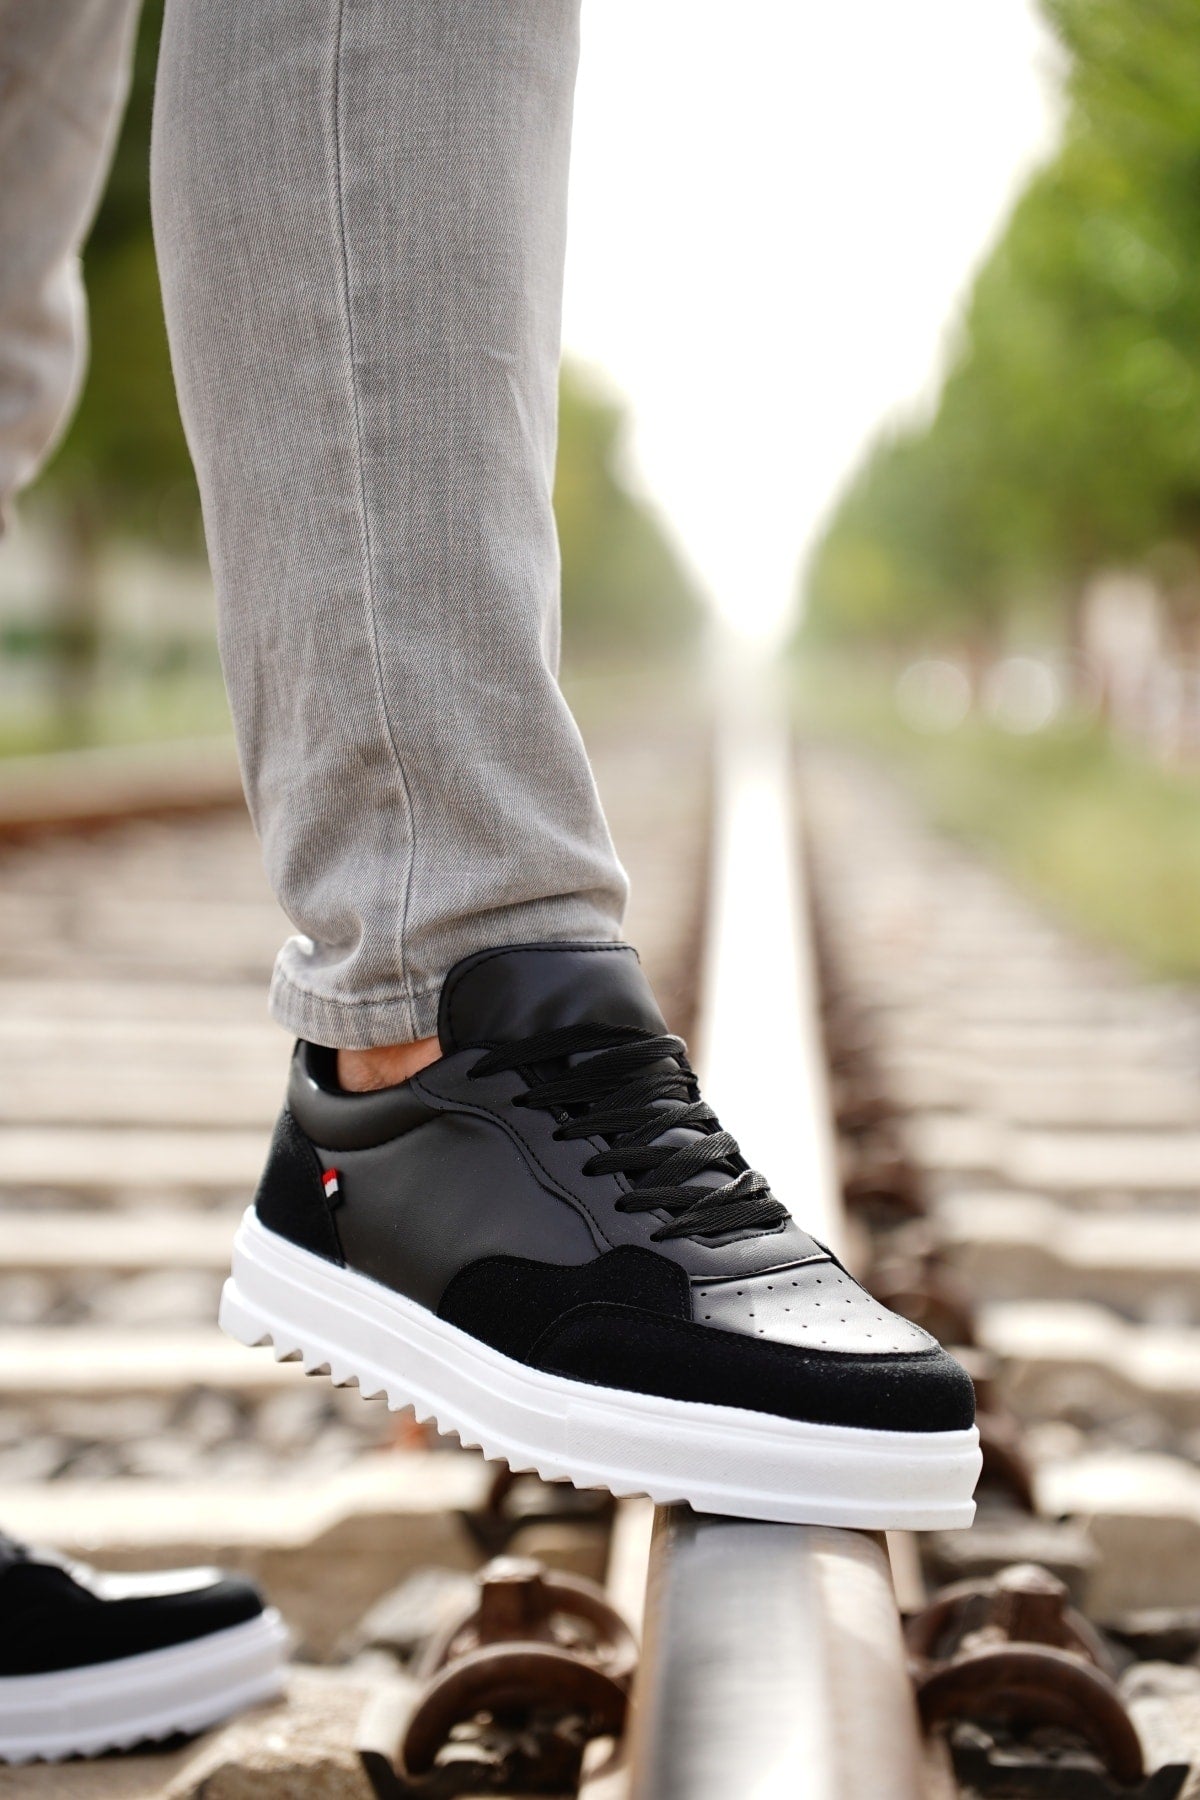 Men's Black Lace-Up Casual Sneakers Wsb0280